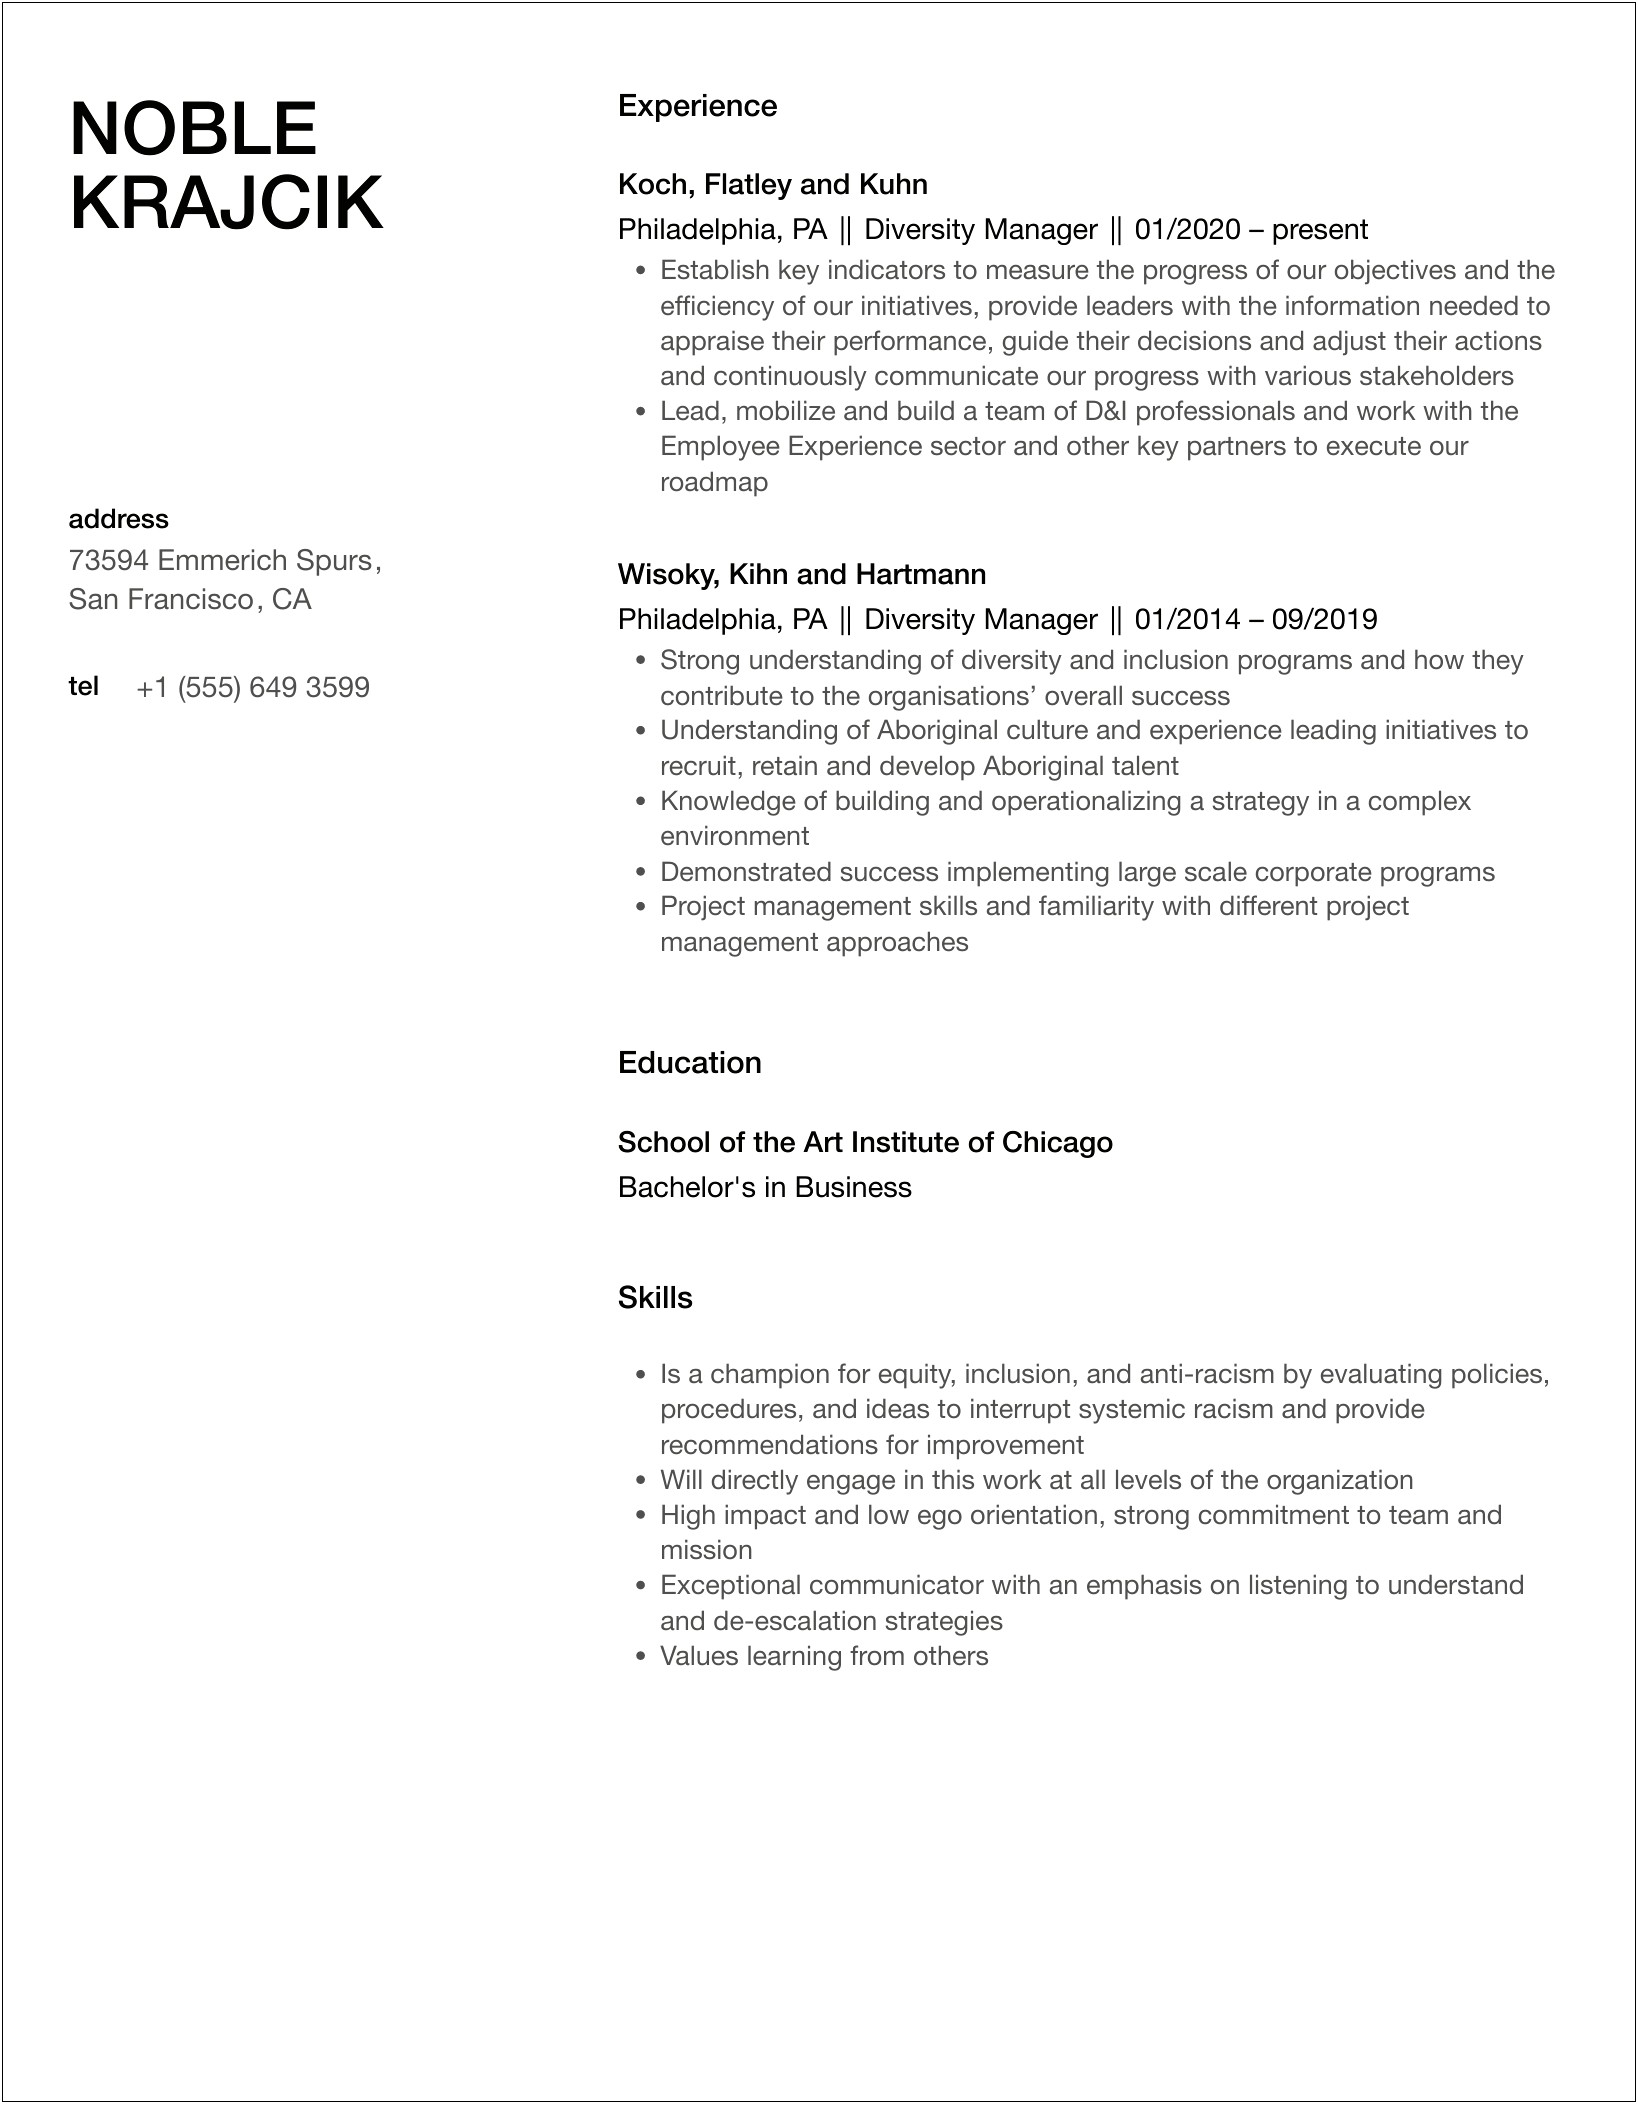 Work With Diverse People Skills Resume